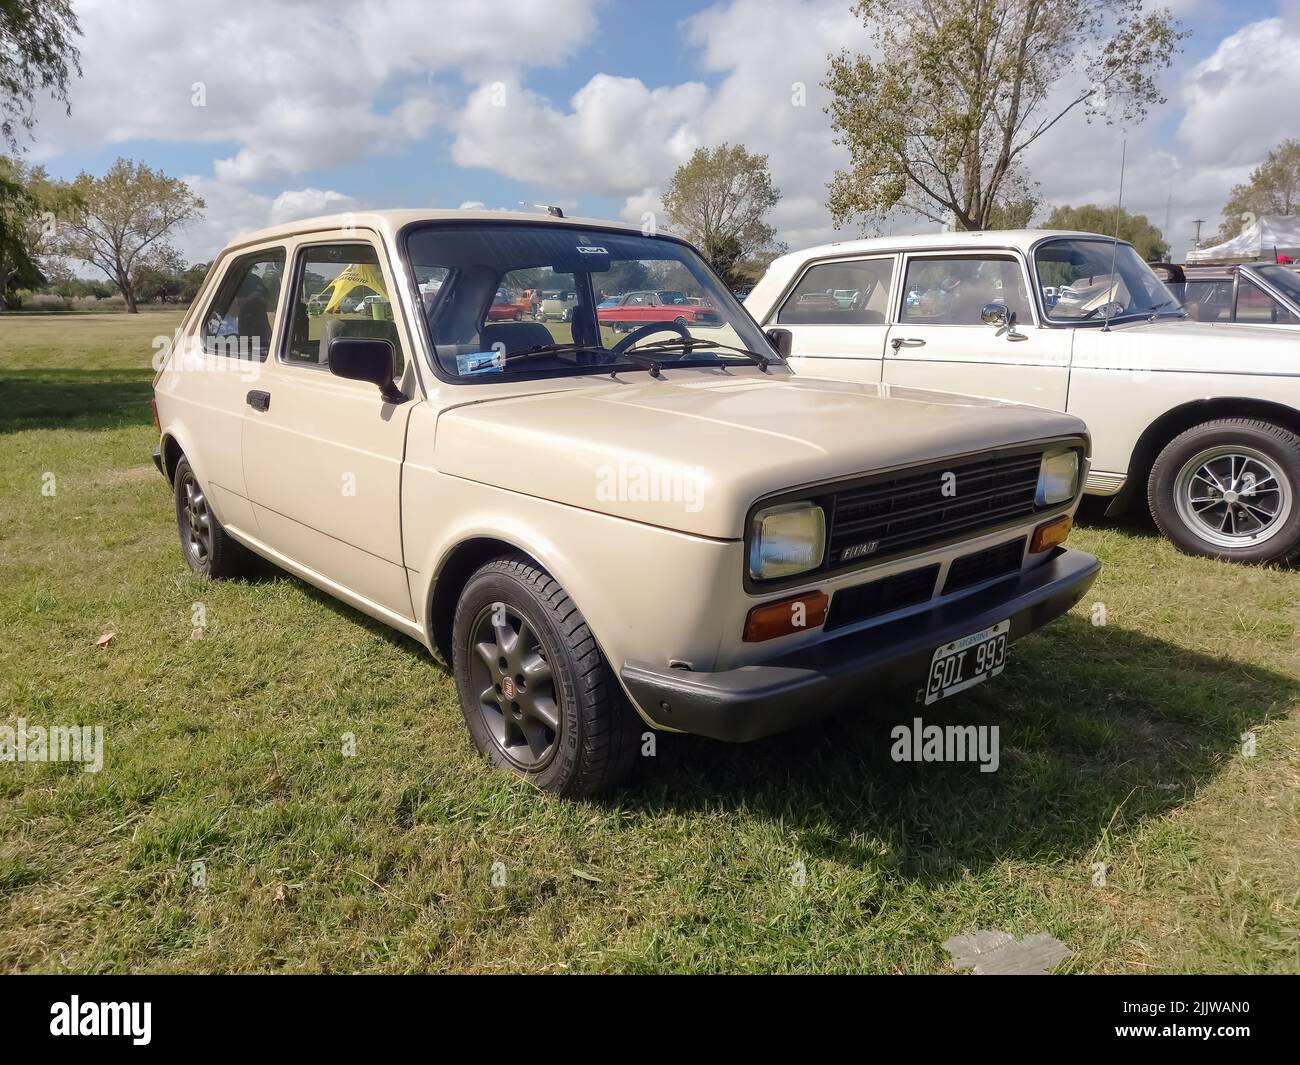 Old beige Fiat 147 three door hatchback 1981 in the countryside. Sunny day. Nature, grass, trees. Classic car show. Stock Photo